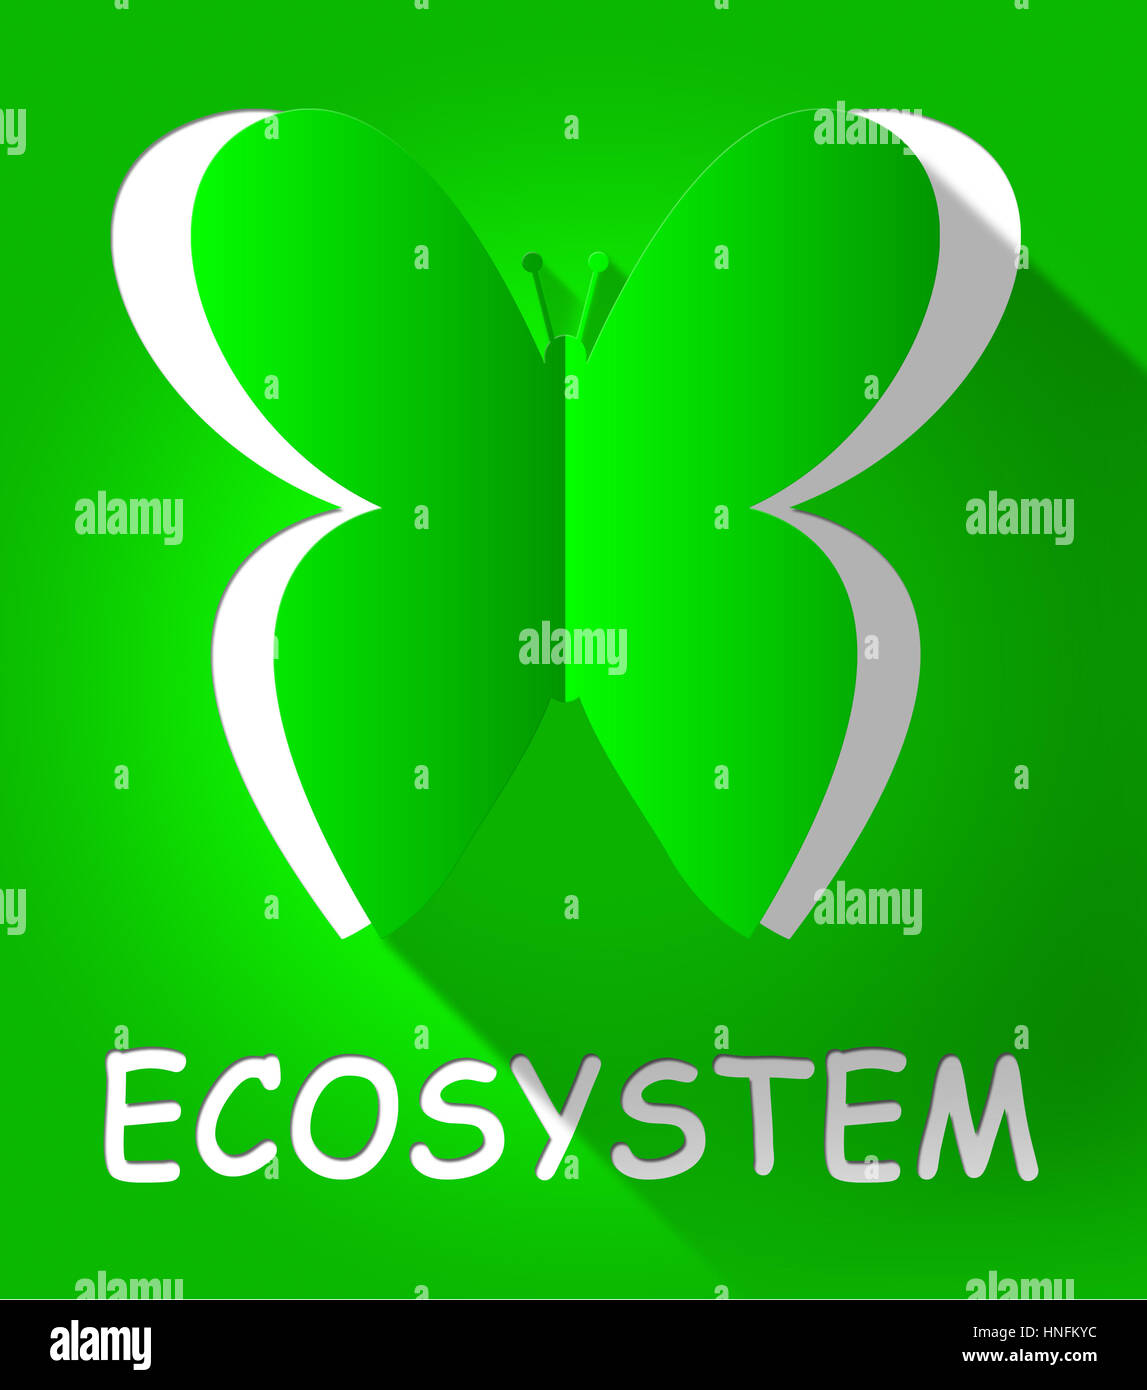 Ecosystem Butterfly Cutout Shows Eco Systems 3d Illustration Stock Photo